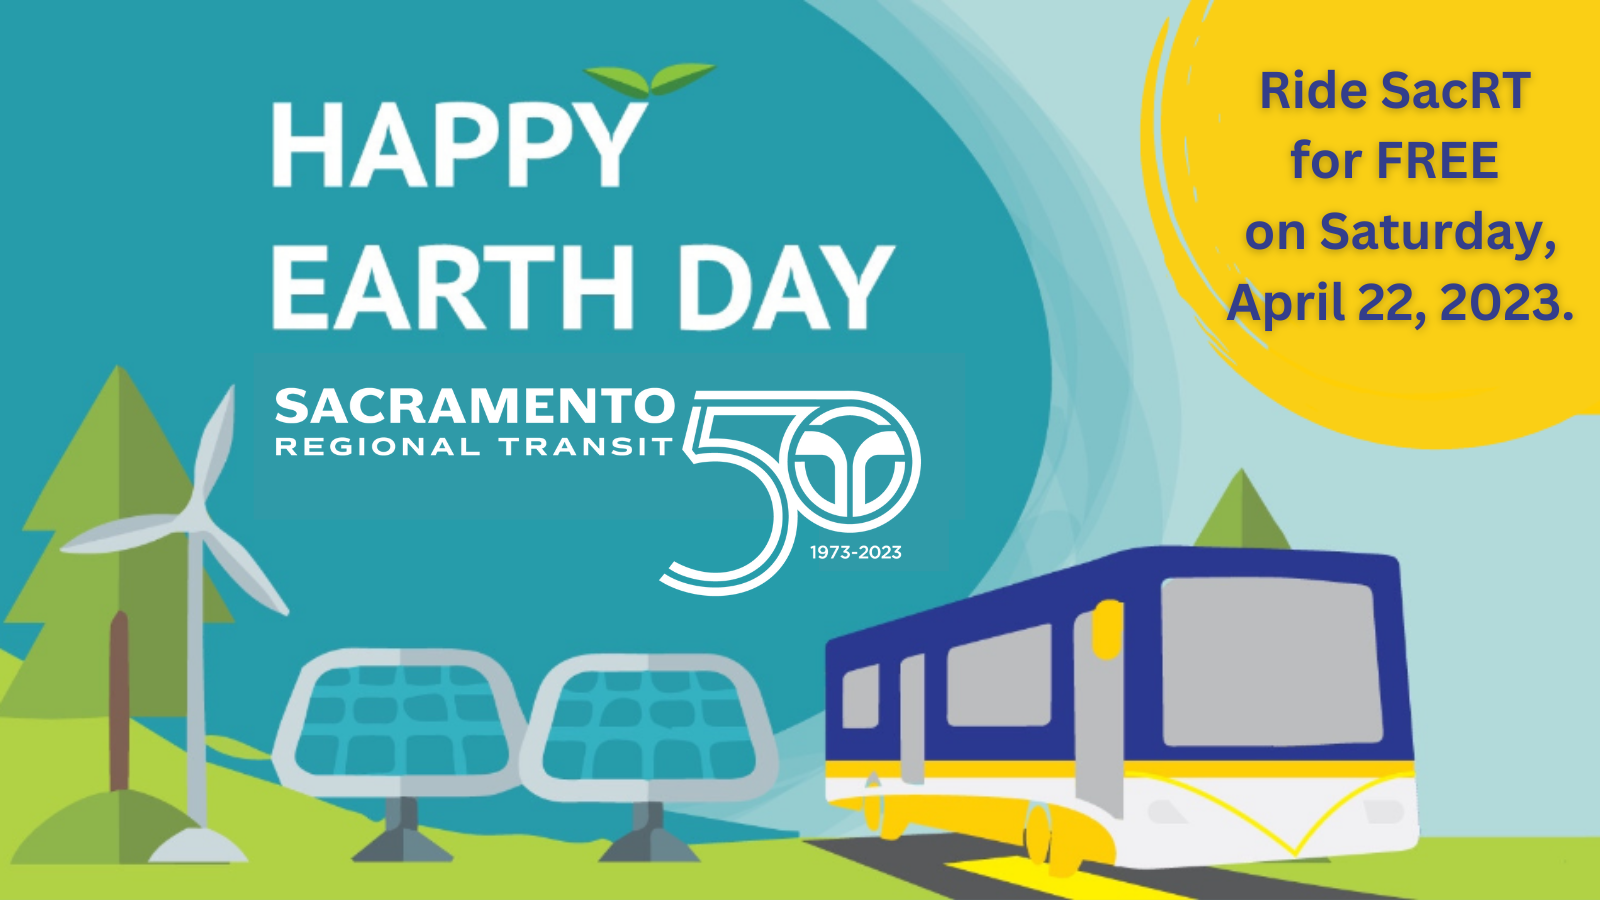 Happy Earth Day - Ride SacRT for free on Saturday, April 22, 2023